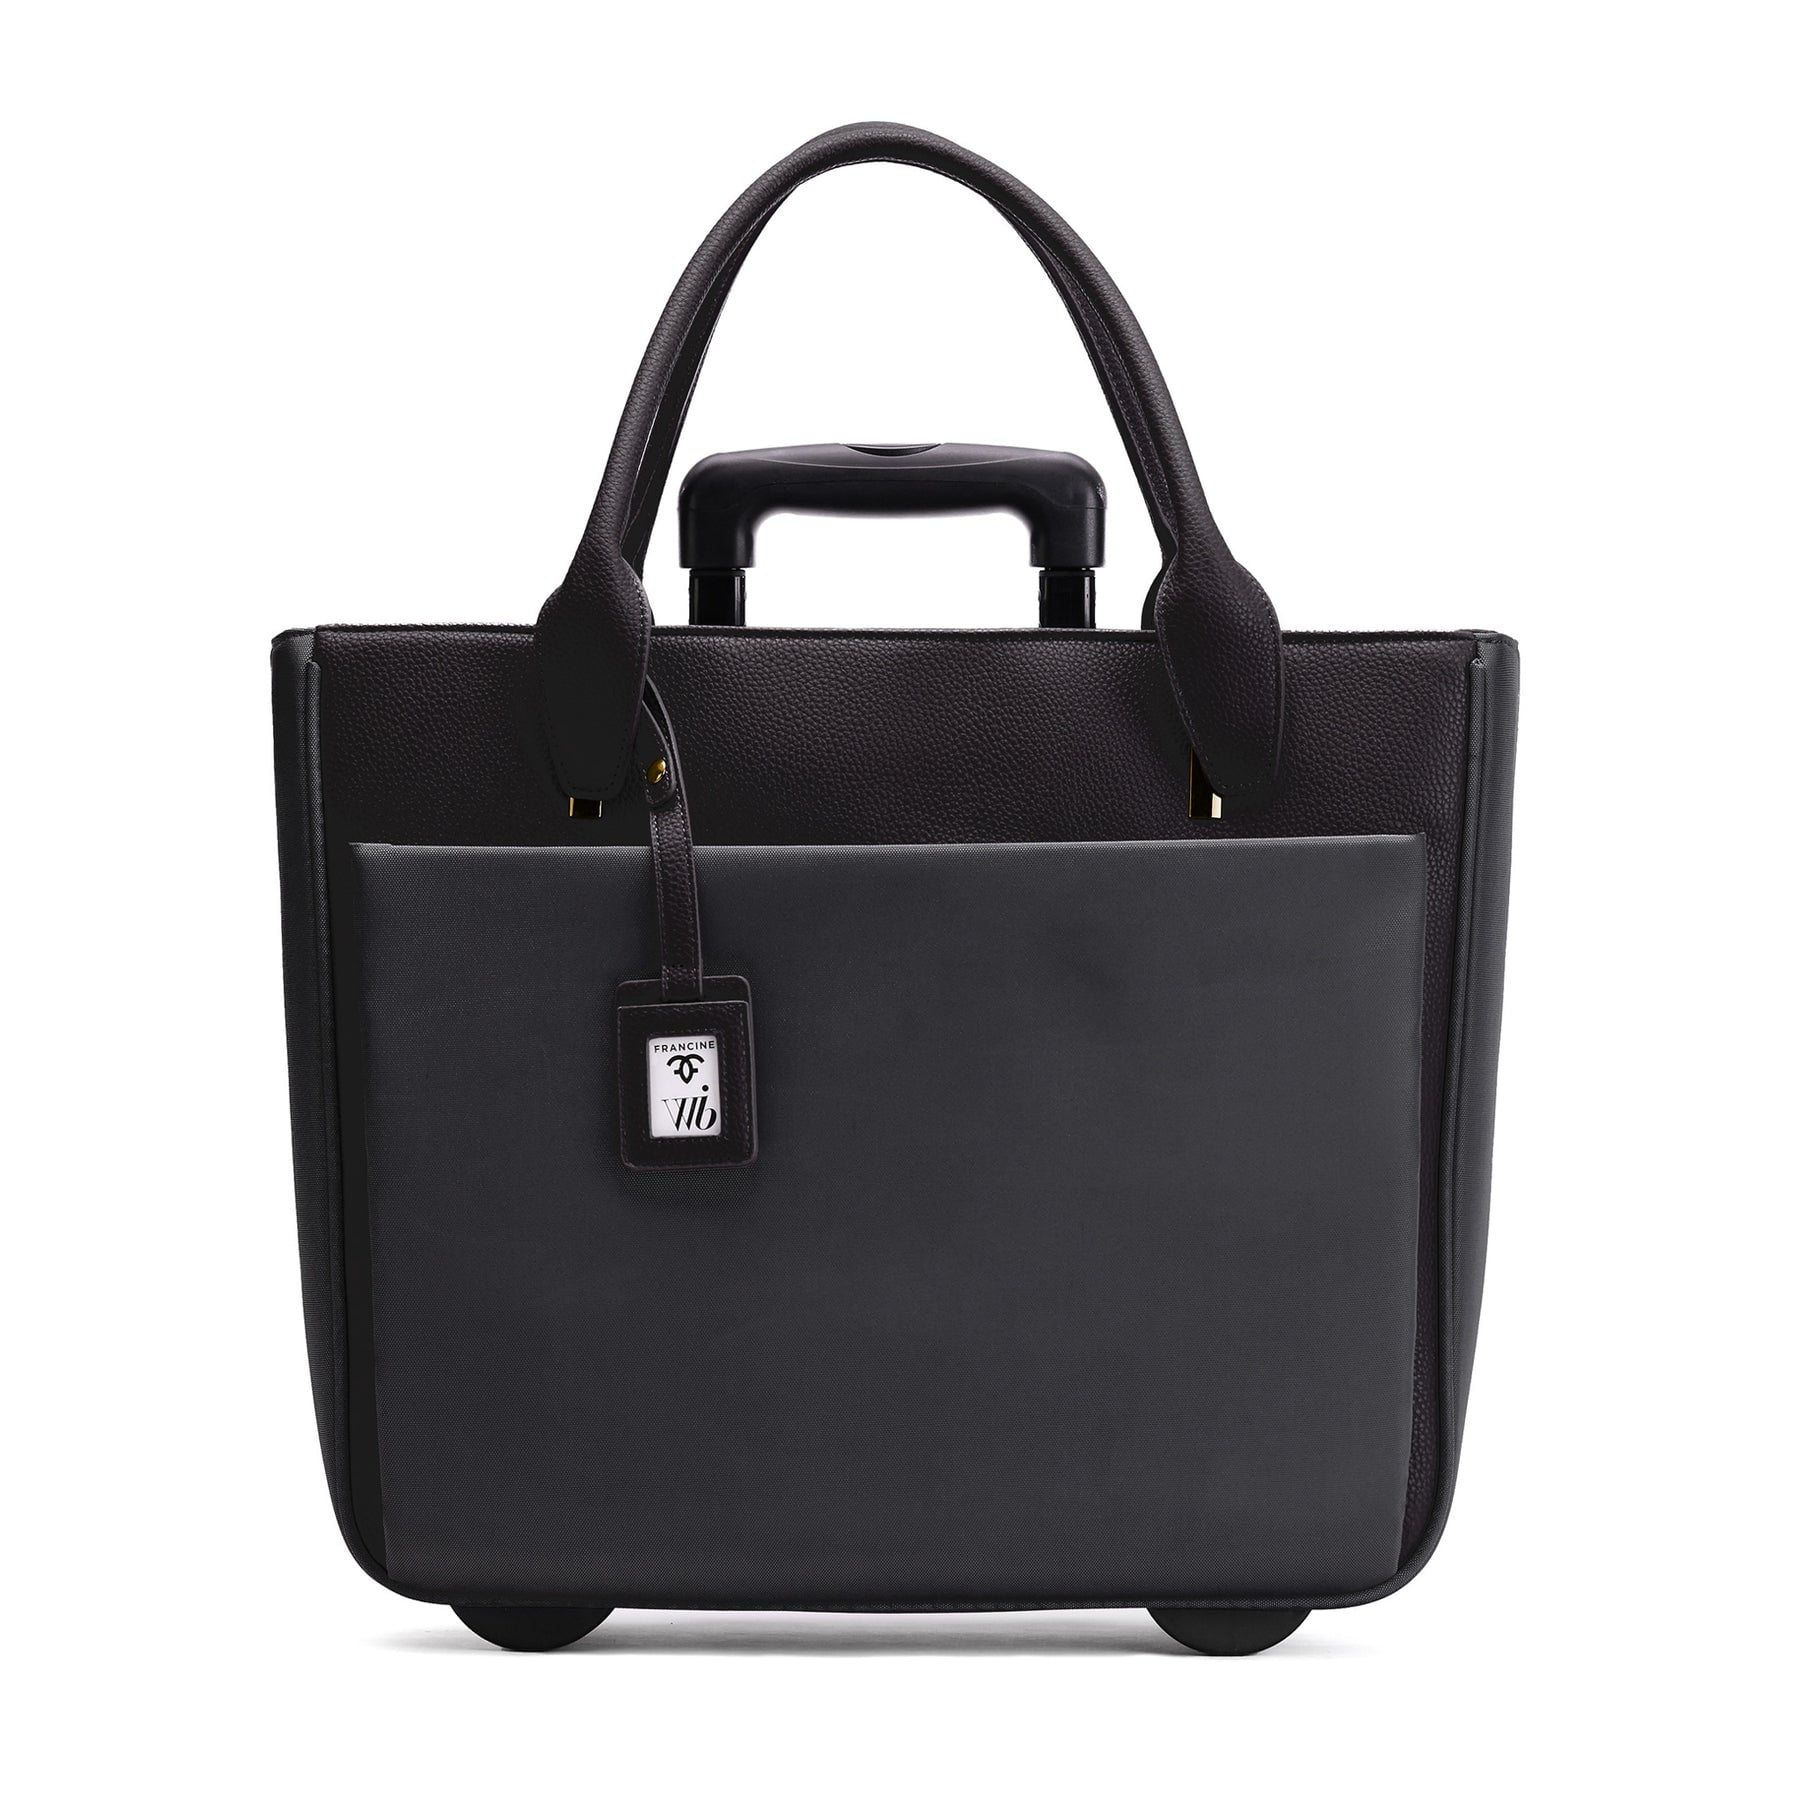 Kate Spade Madison Saffiano East West Leather Laptop Tote In Black | eBay